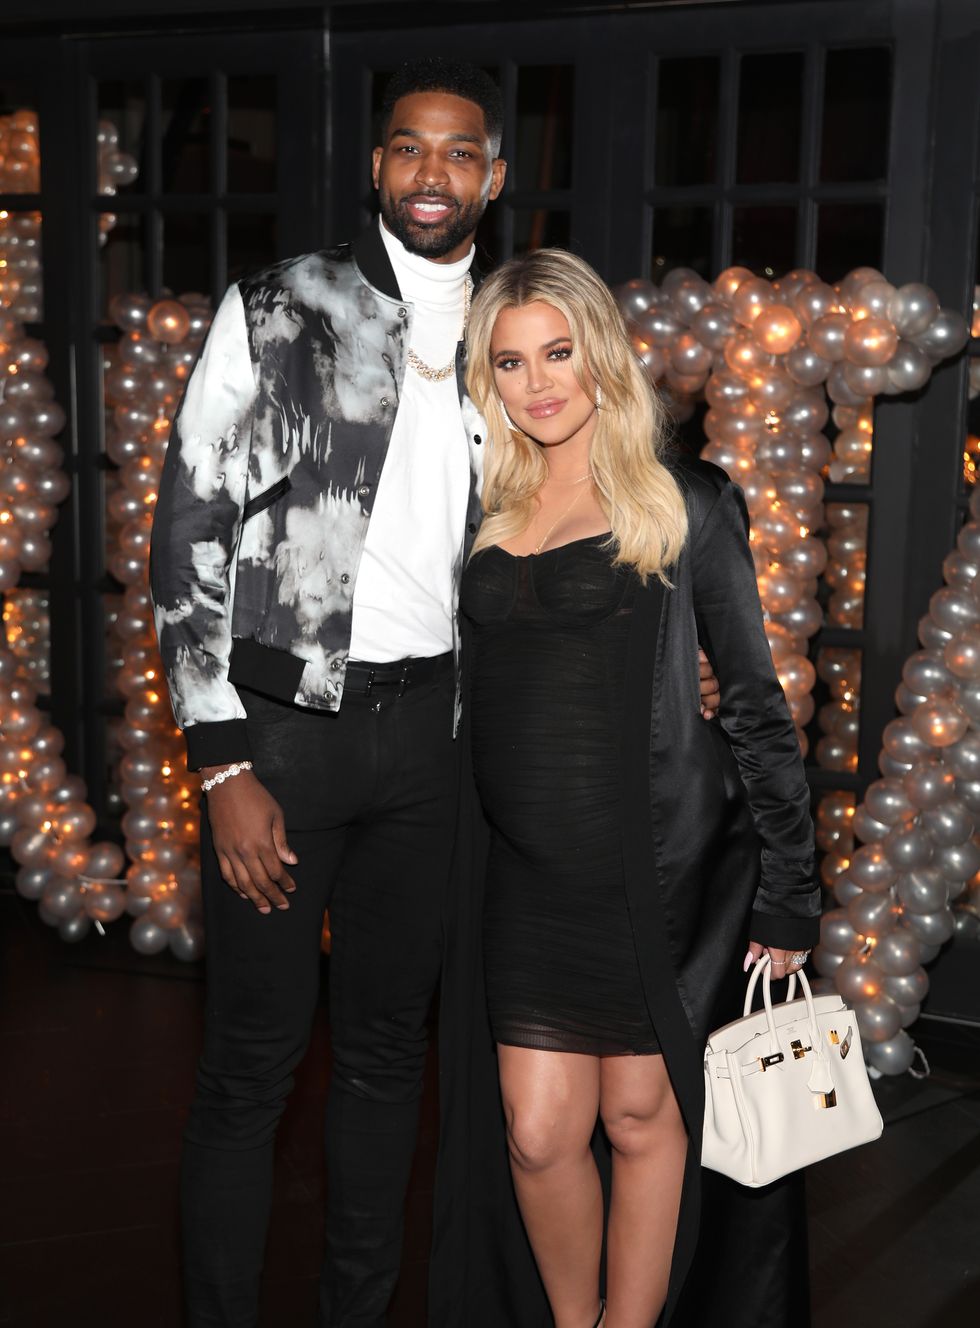 los angeles, ca march 10 tristan thompson and khloe kardashian pose for a photo as remy martin celebrates tristan thompsons birthday at beauty essex on march 10, 2018 in los angeles, california photo by jerritt clarkgetty images for remy martin